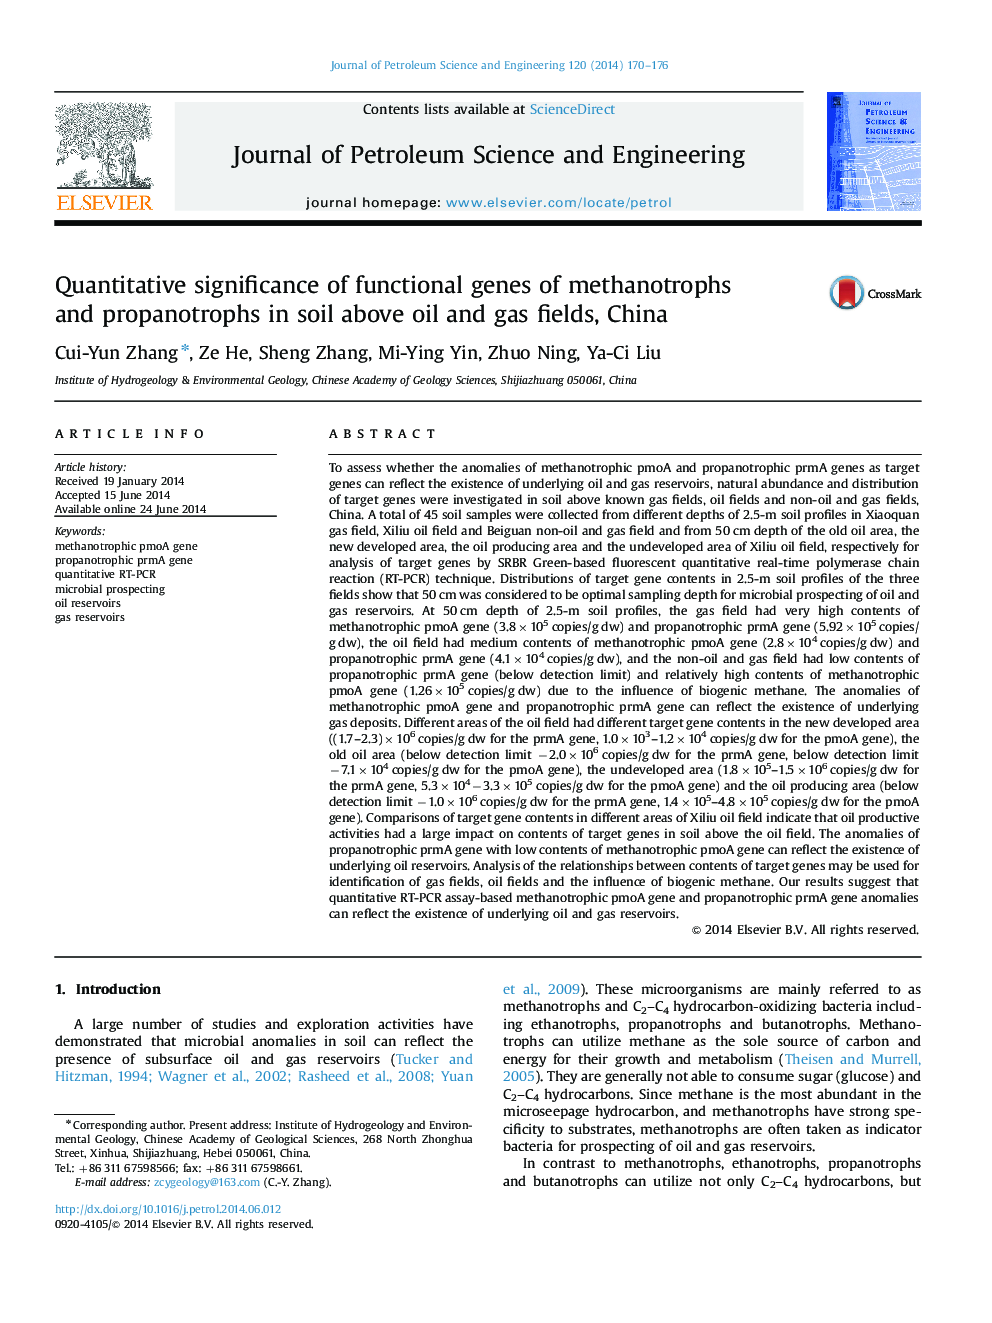 Quantitative significance of functional genes of methanotrophs and propanotrophs in soil above oil and gas fields, China